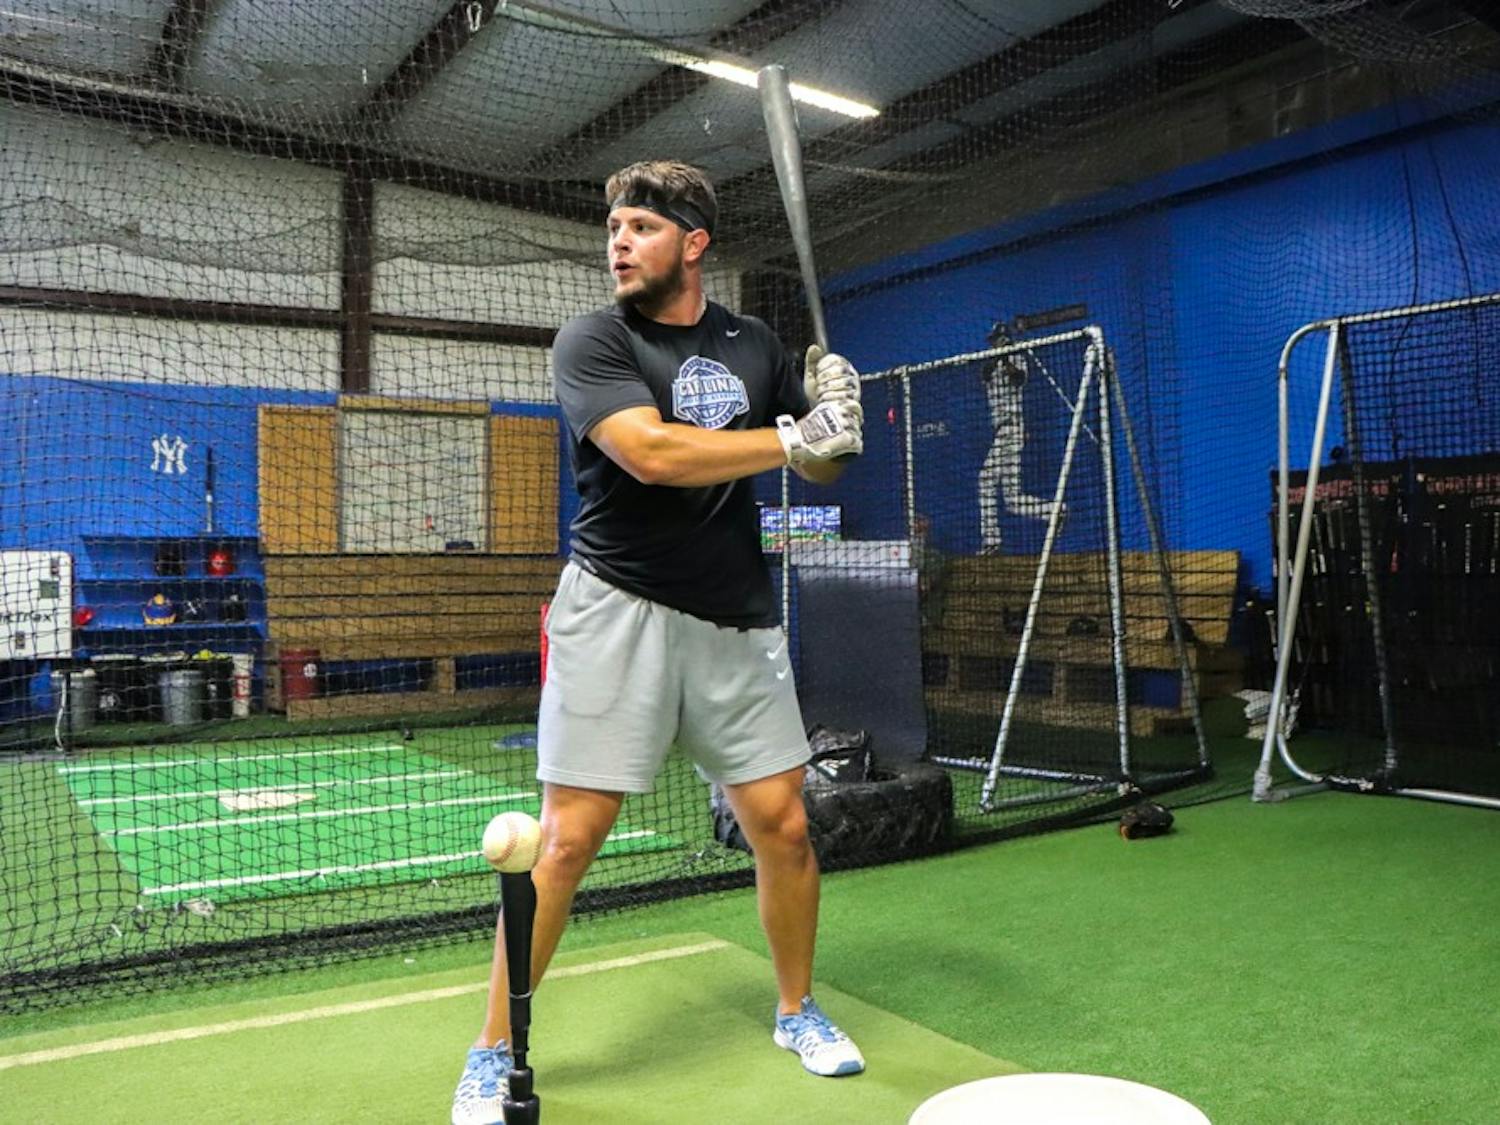 While the MLB adjusted their schedule to allow for games to continue during the COVID-19 pandemic, minor league games were cancelled. Now, minor league players are figuring out how to adjust and prepare for their next season. Photo courtesy of Josh Conner and UNC Media Hub.